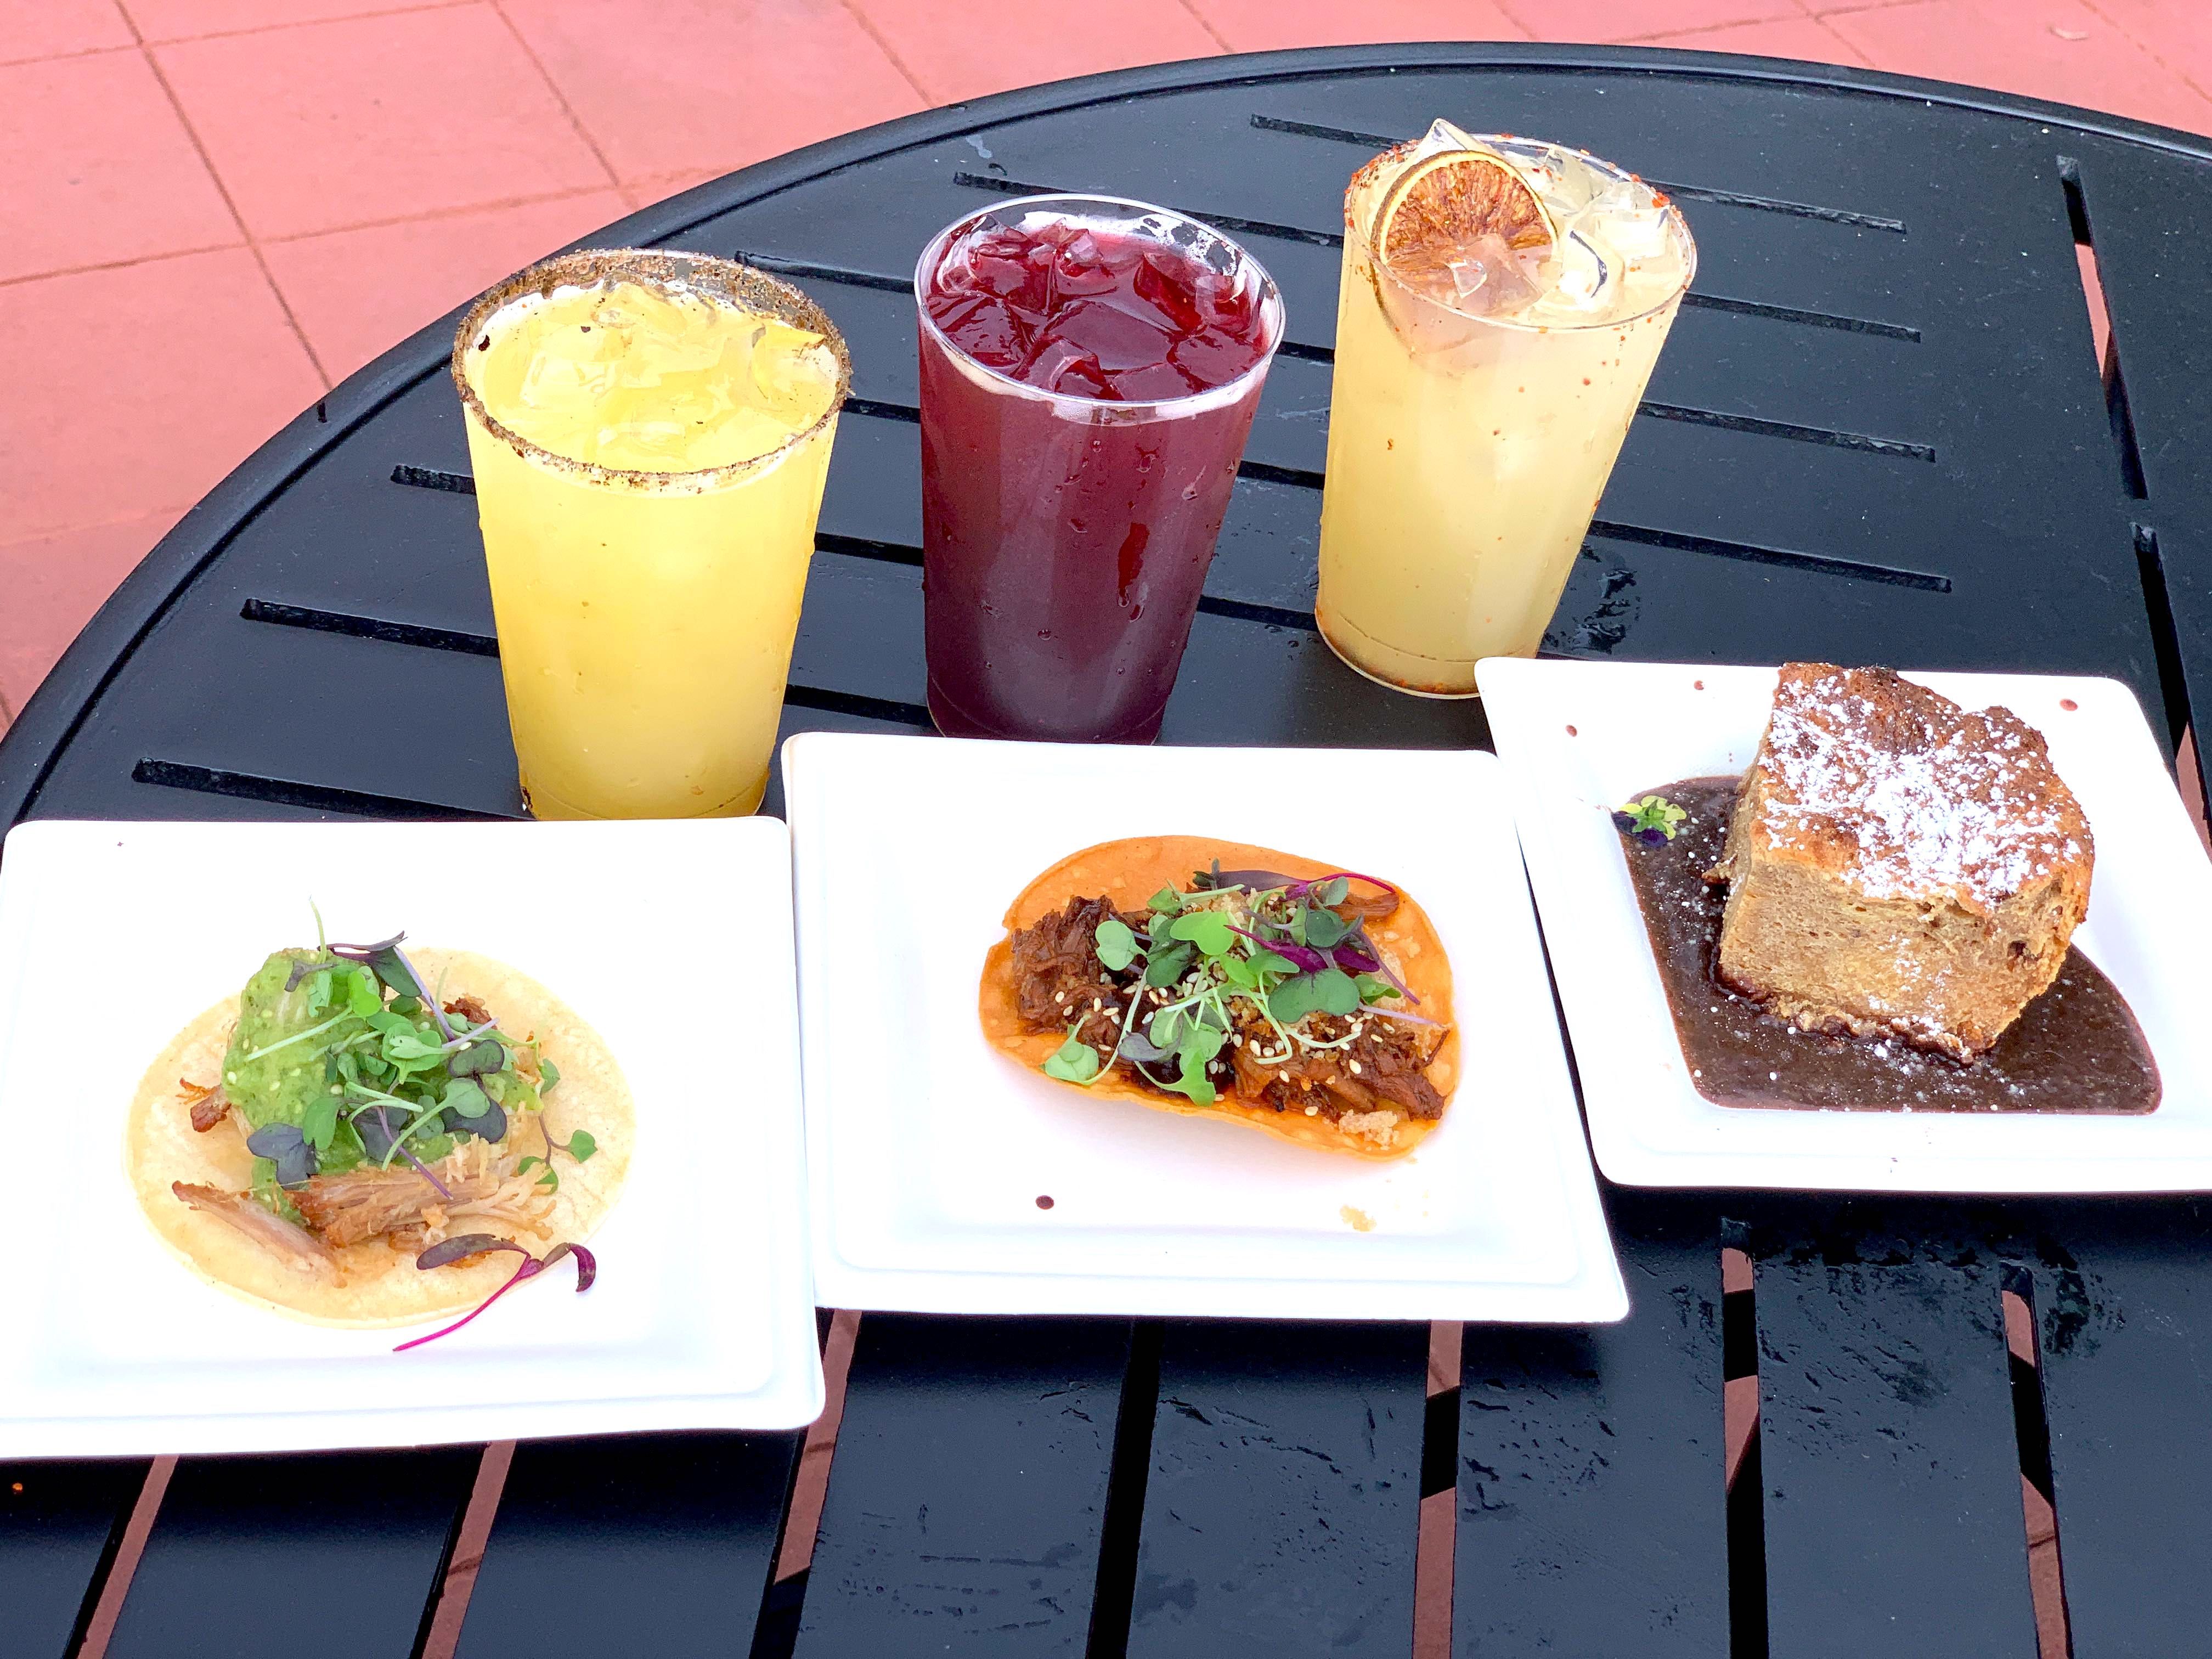 REVIEW: Mexico at Epcot International Food & Wine Festival 2019 - WDW